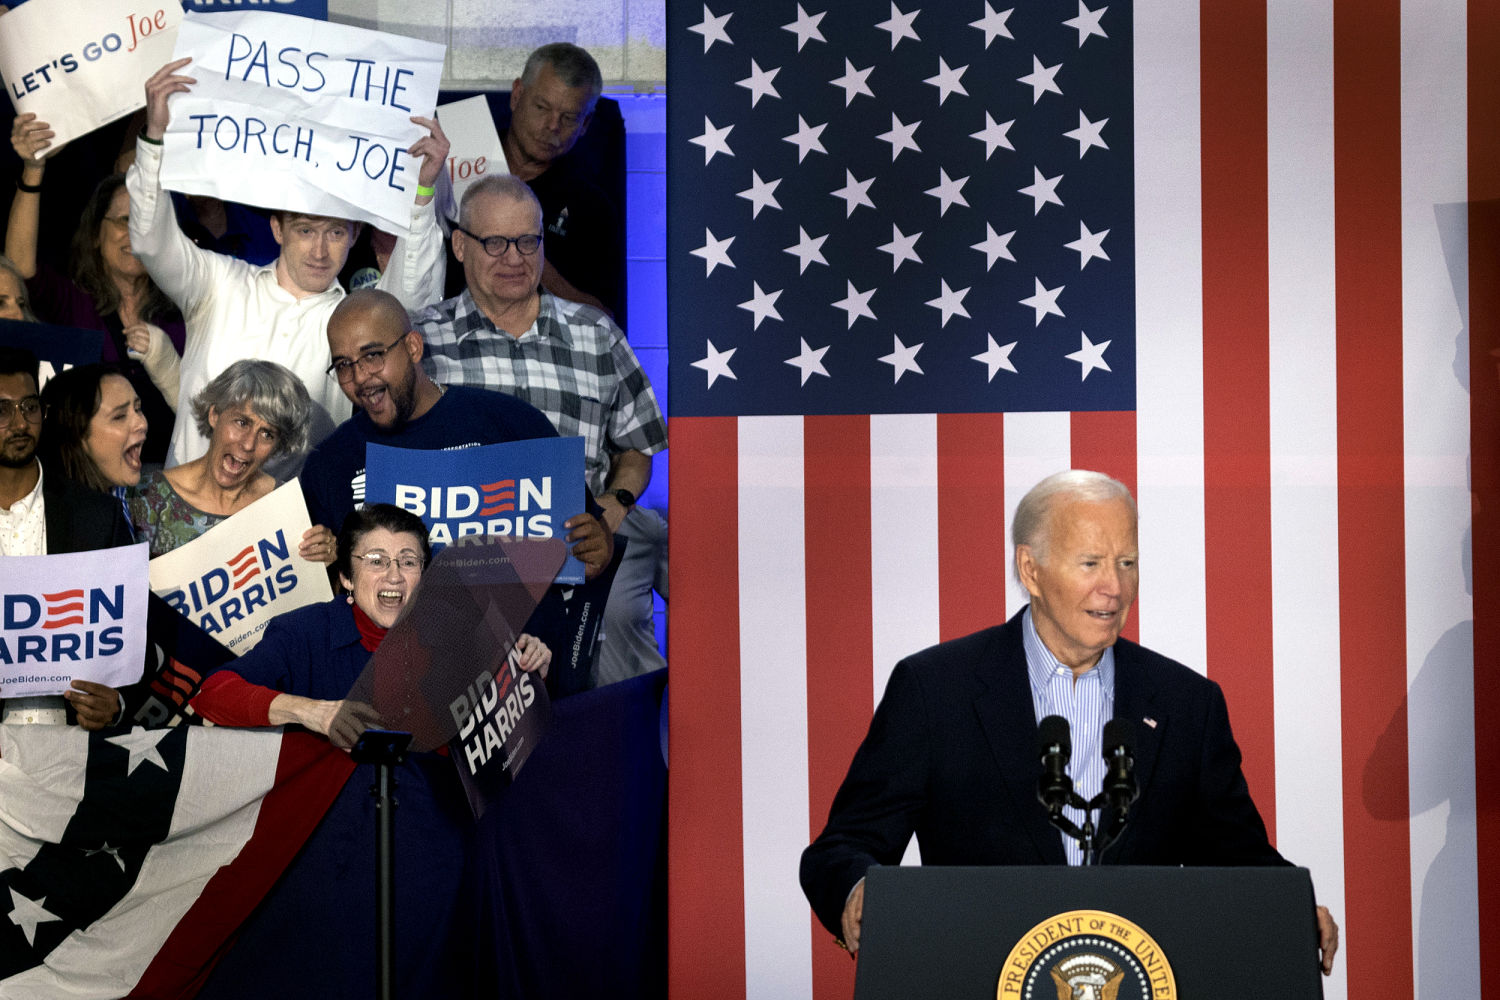 Radio hosts say Biden's aides provided questions before interviews